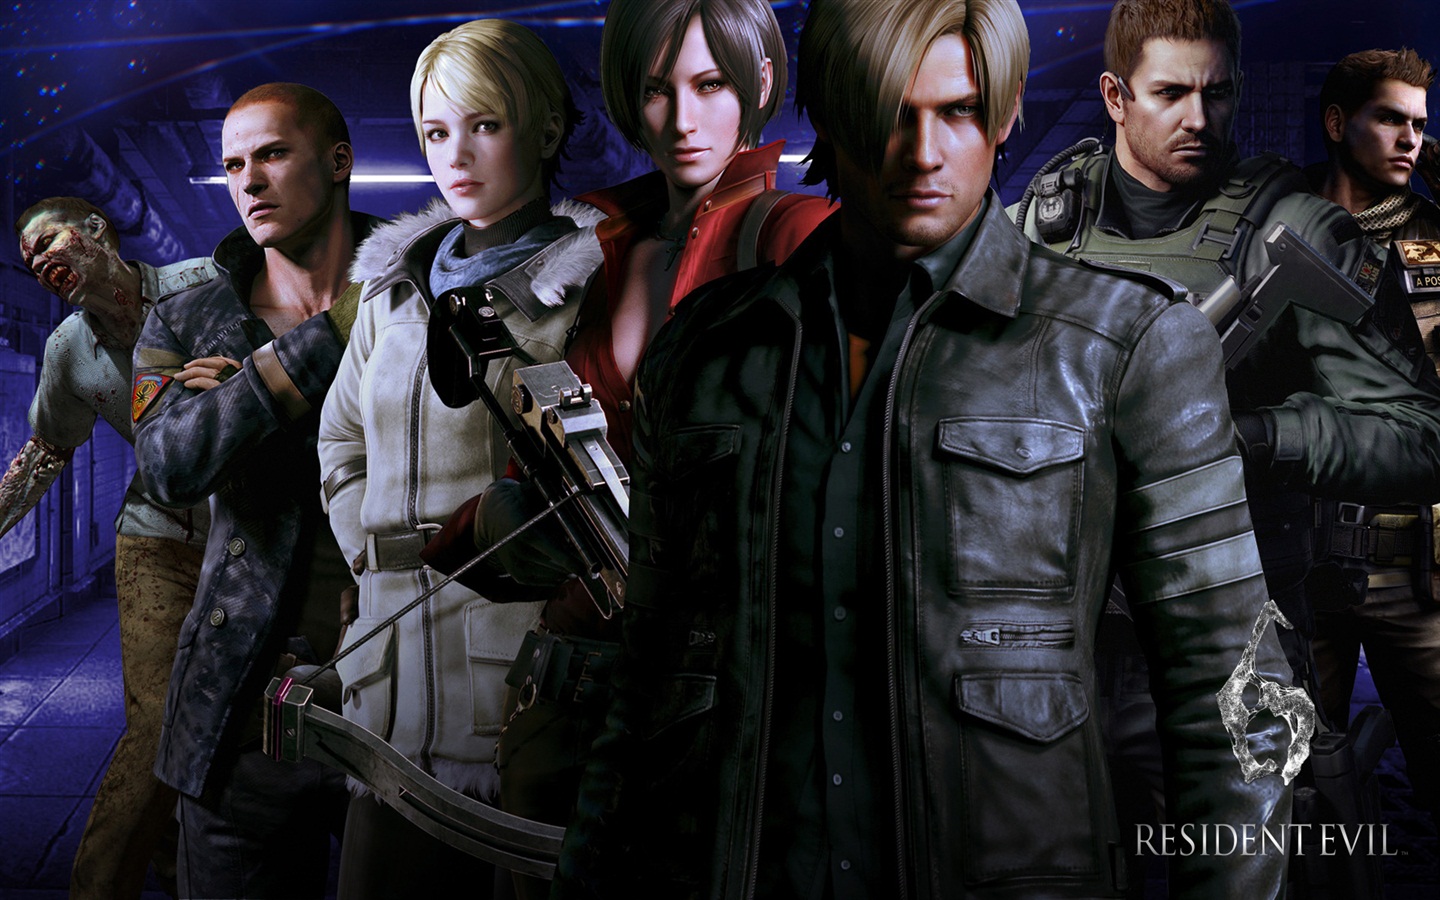 Resident Evil 6 HD game wallpapers #10 - 1440x900